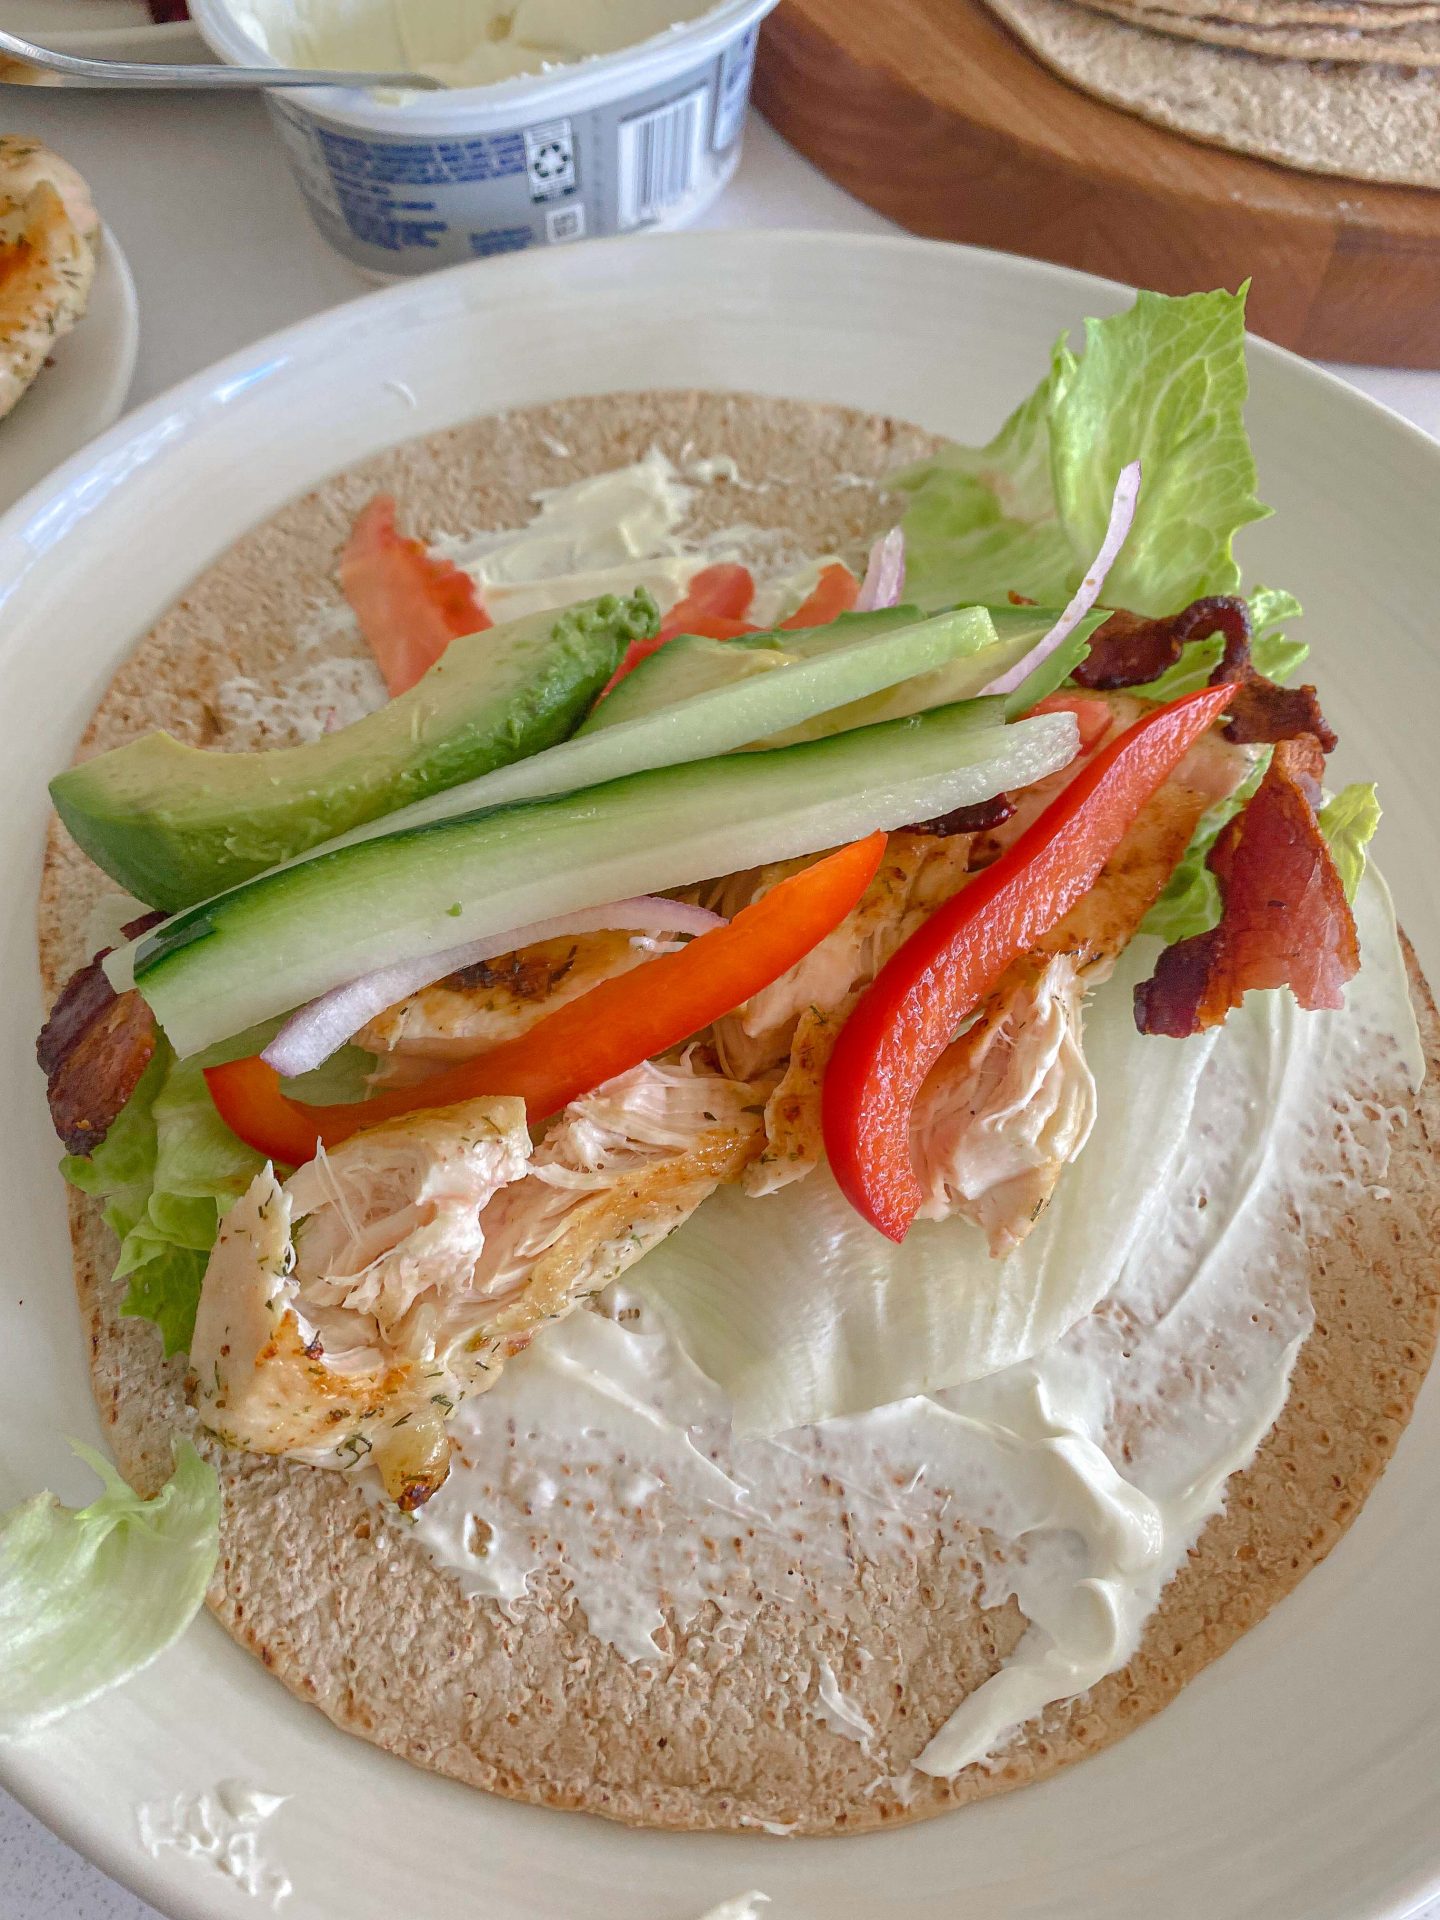 low carb multigrain wraps, lettuce, veggies, bacon, lunch, meal prep, cream cheese, chicken, ranch, healthy meal wraps, lunch ideas, wraps for lunch, wraps to go, easy on the go meals, travel ideas, travel food, bacon, cream cheese, low carb, keto, diet